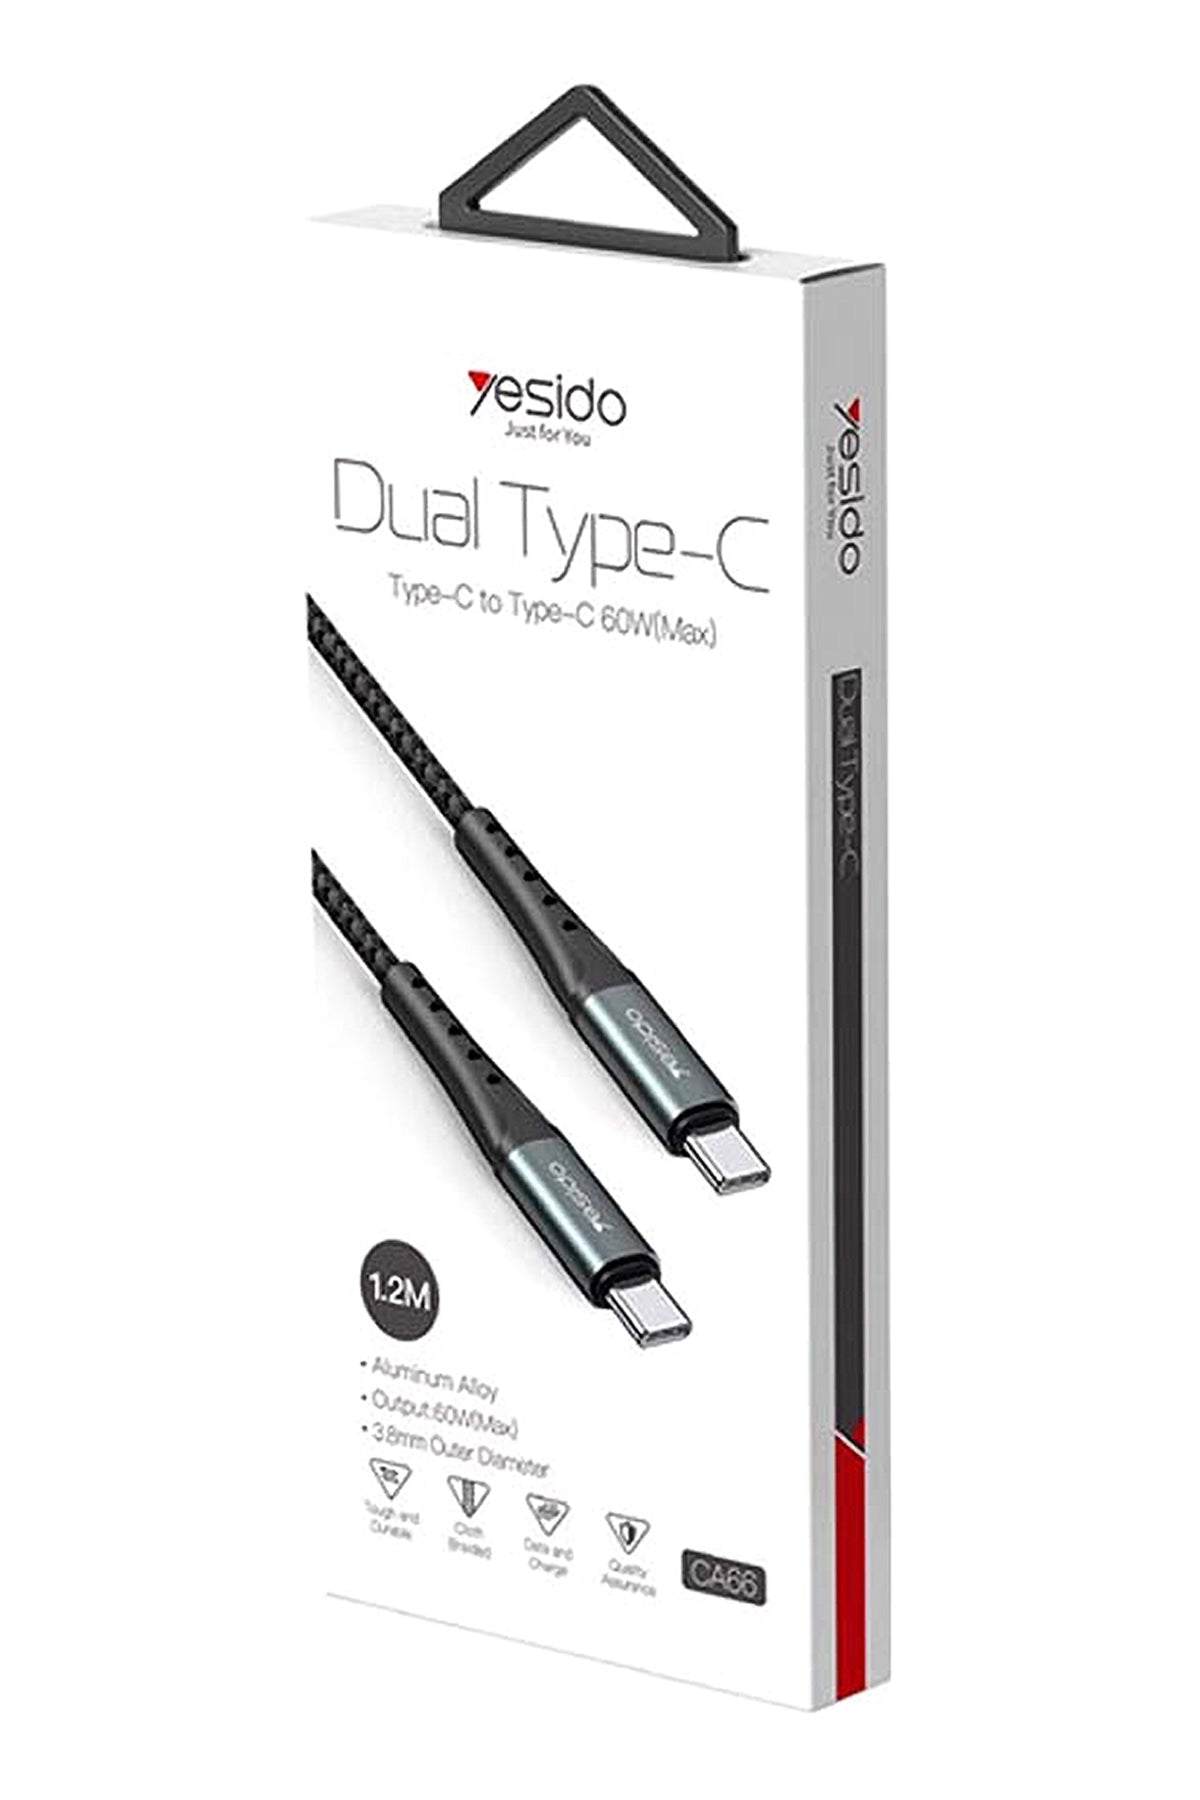 YESIDO BRAIDED TYPE C TO TYPE C CABLE(CA66)